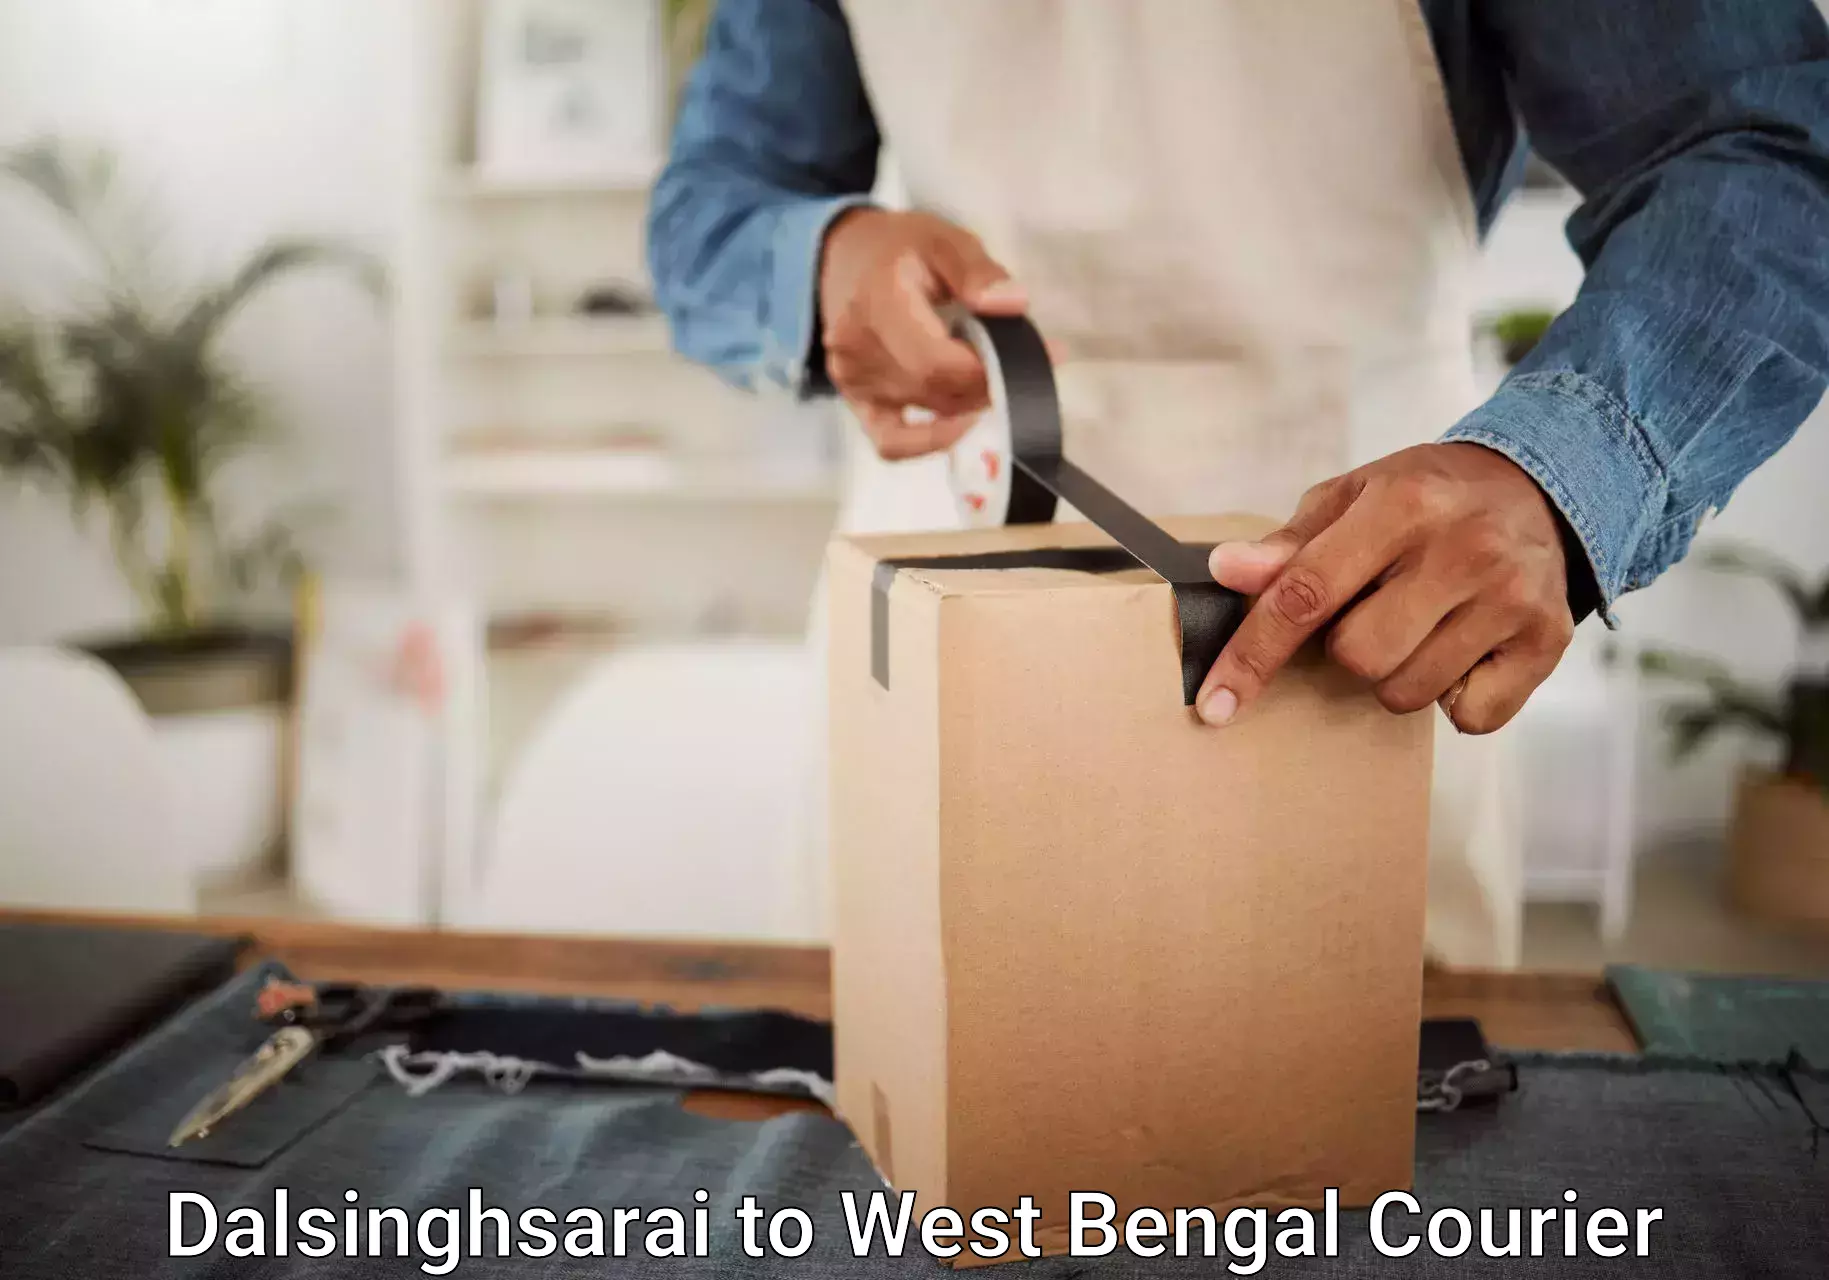 Baggage relocation service in Dalsinghsarai to West Bengal